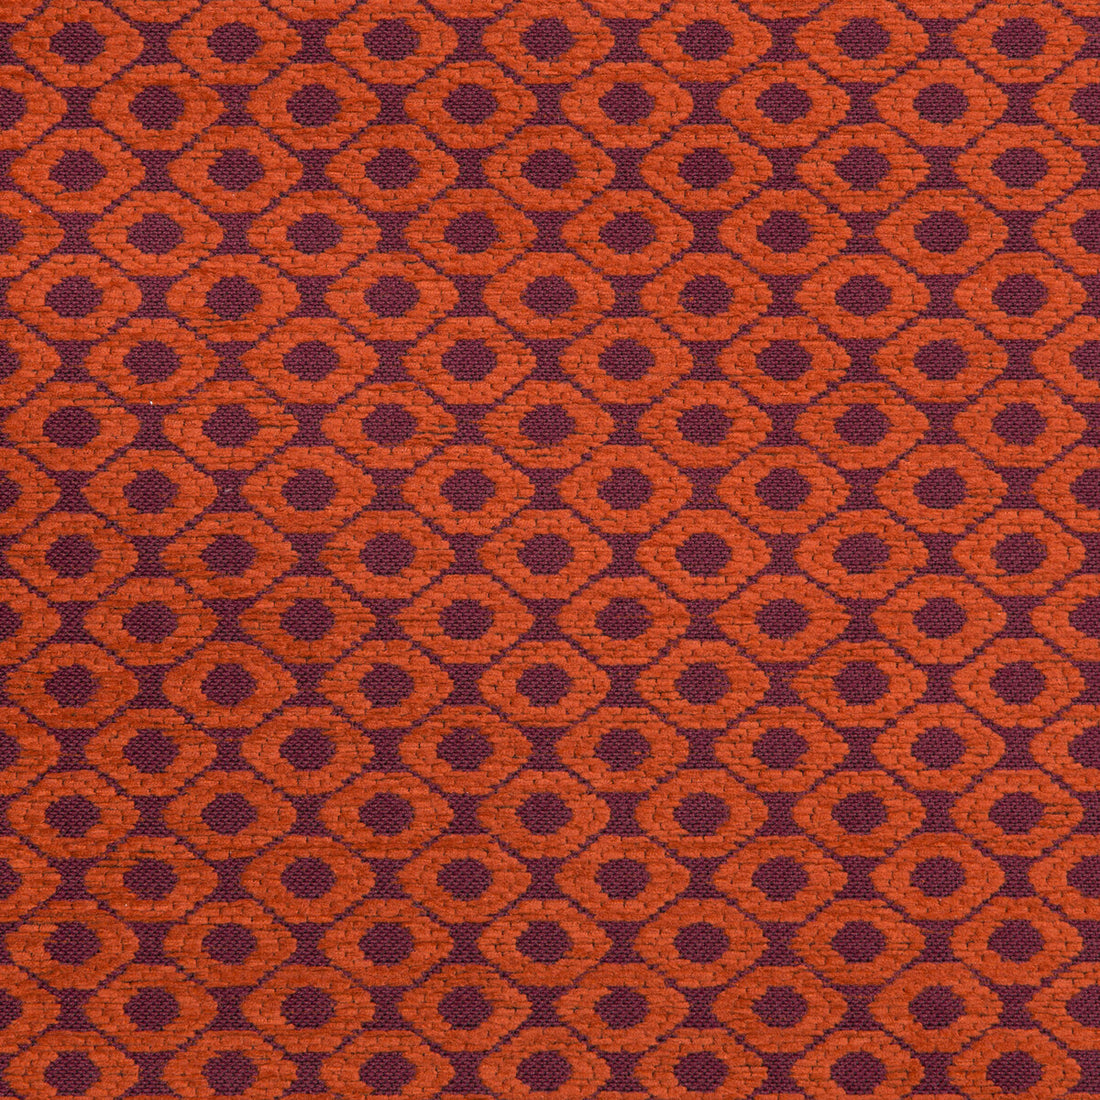 Pave The Way fabric in morocco color - pattern 35867.924.0 - by Kravet Contract in the Gis Crypton collection